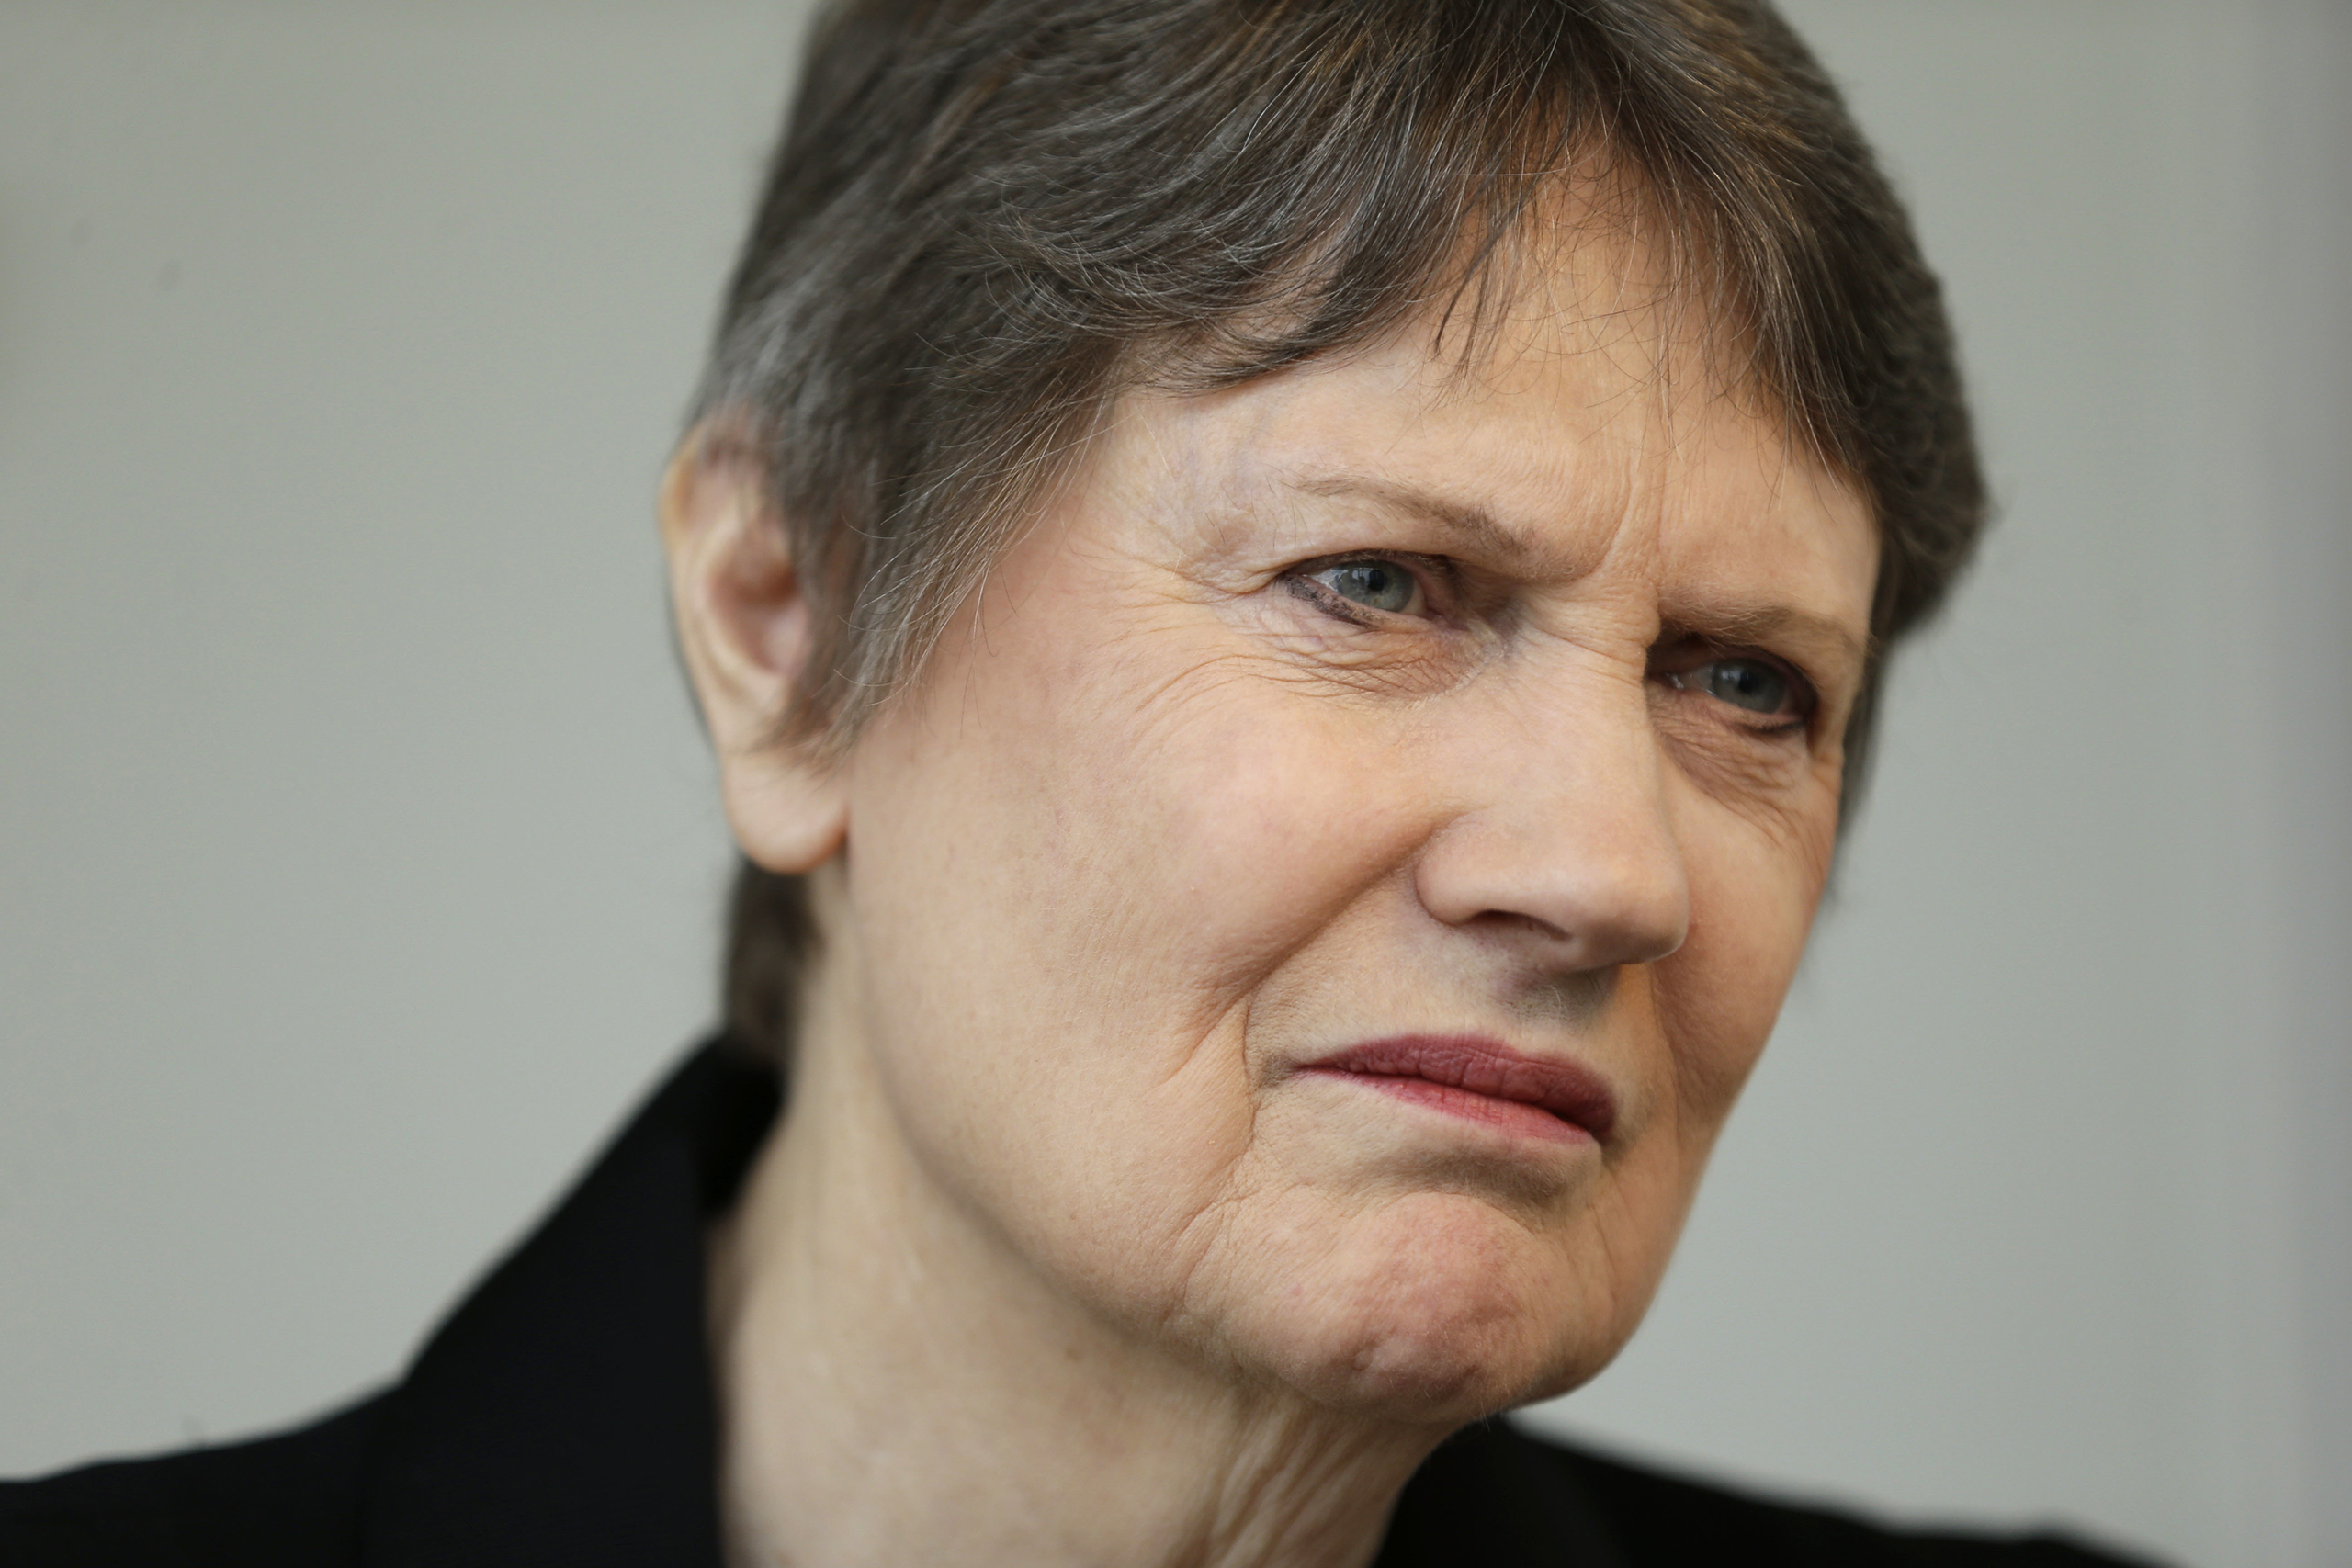 Helen Clark, the former Prime Minister of New Zealand and senior United Nations official, speaks during an interview in New York on April 4, 2016. (Seth Wenig—AP)